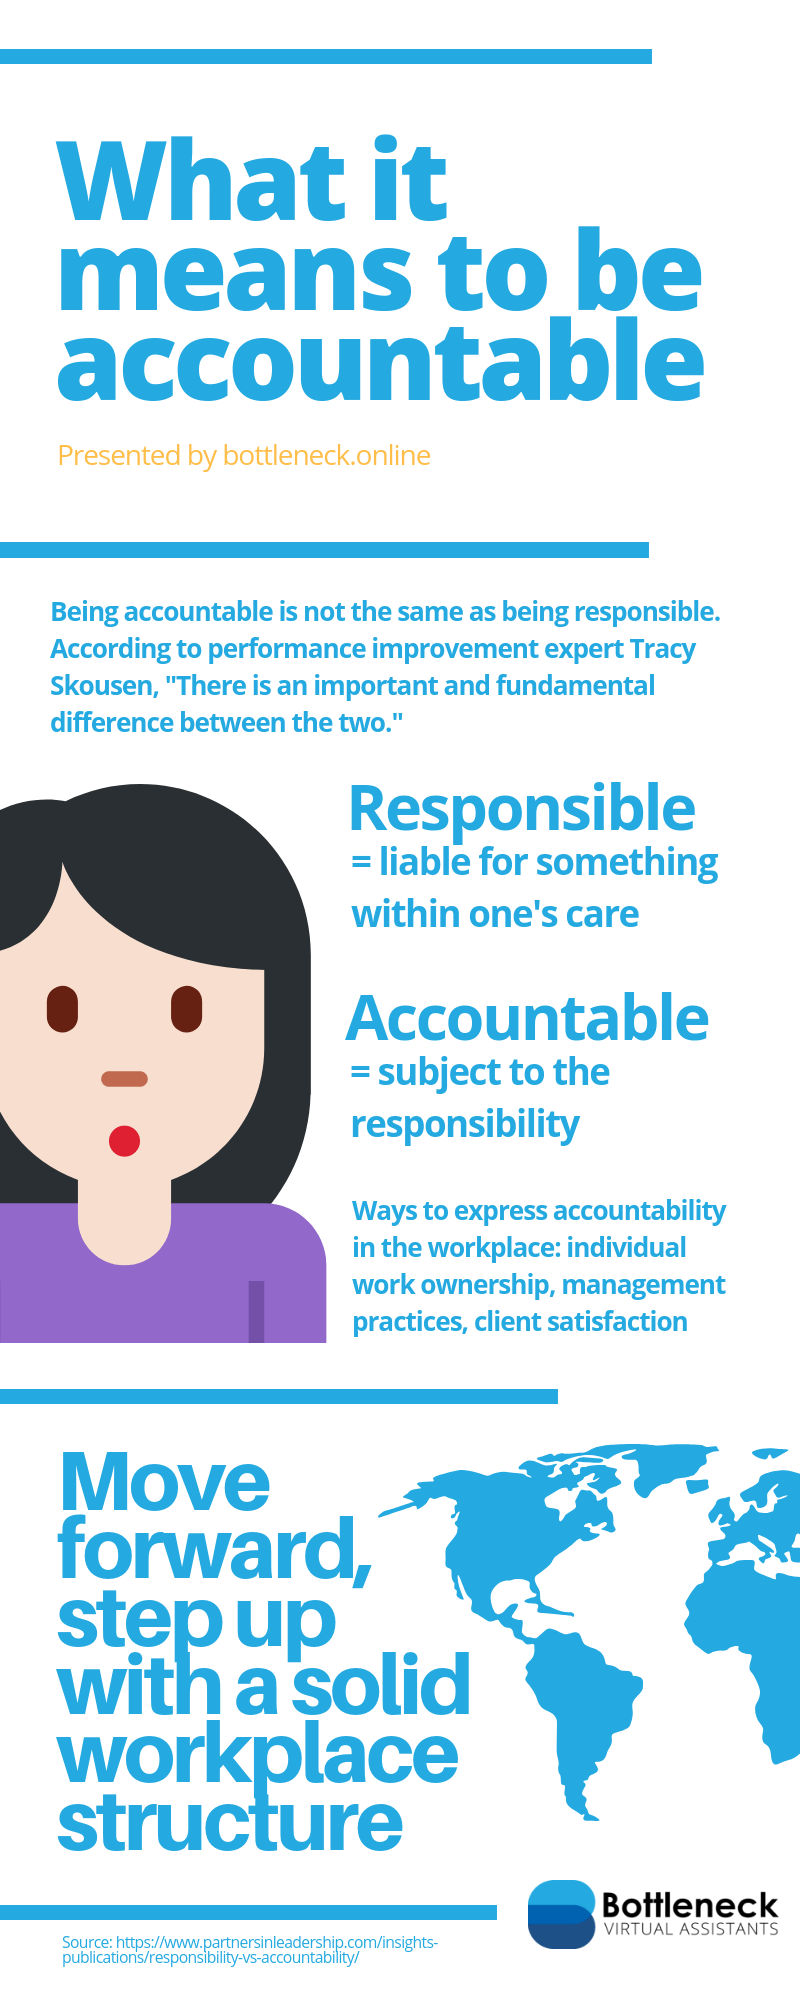 What It Means to Be Accountable